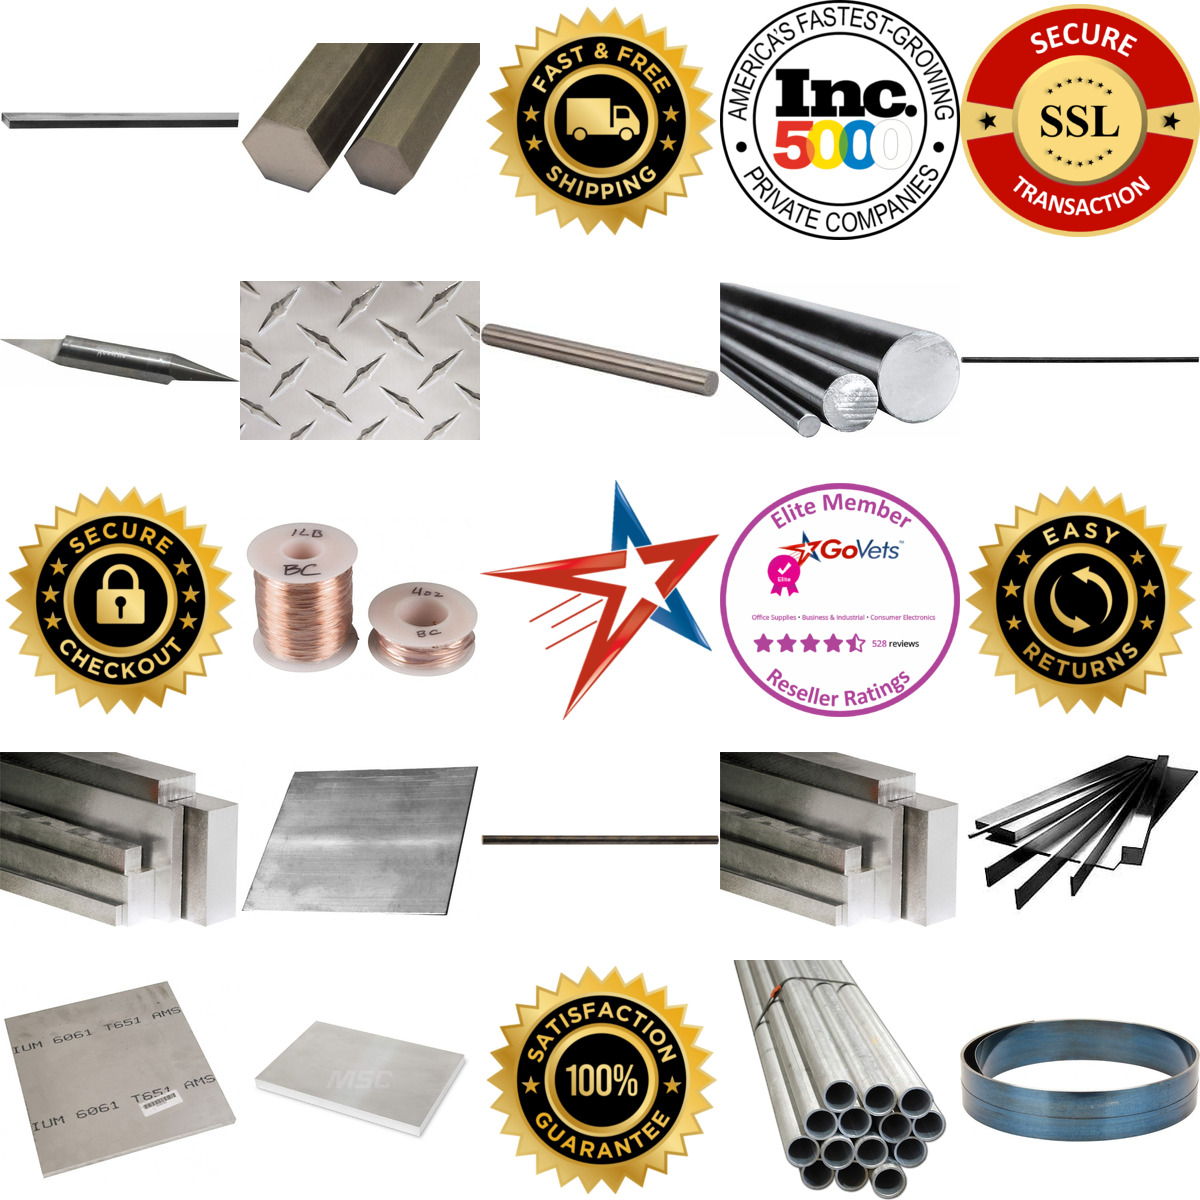 A selection of Metals products on GoVets